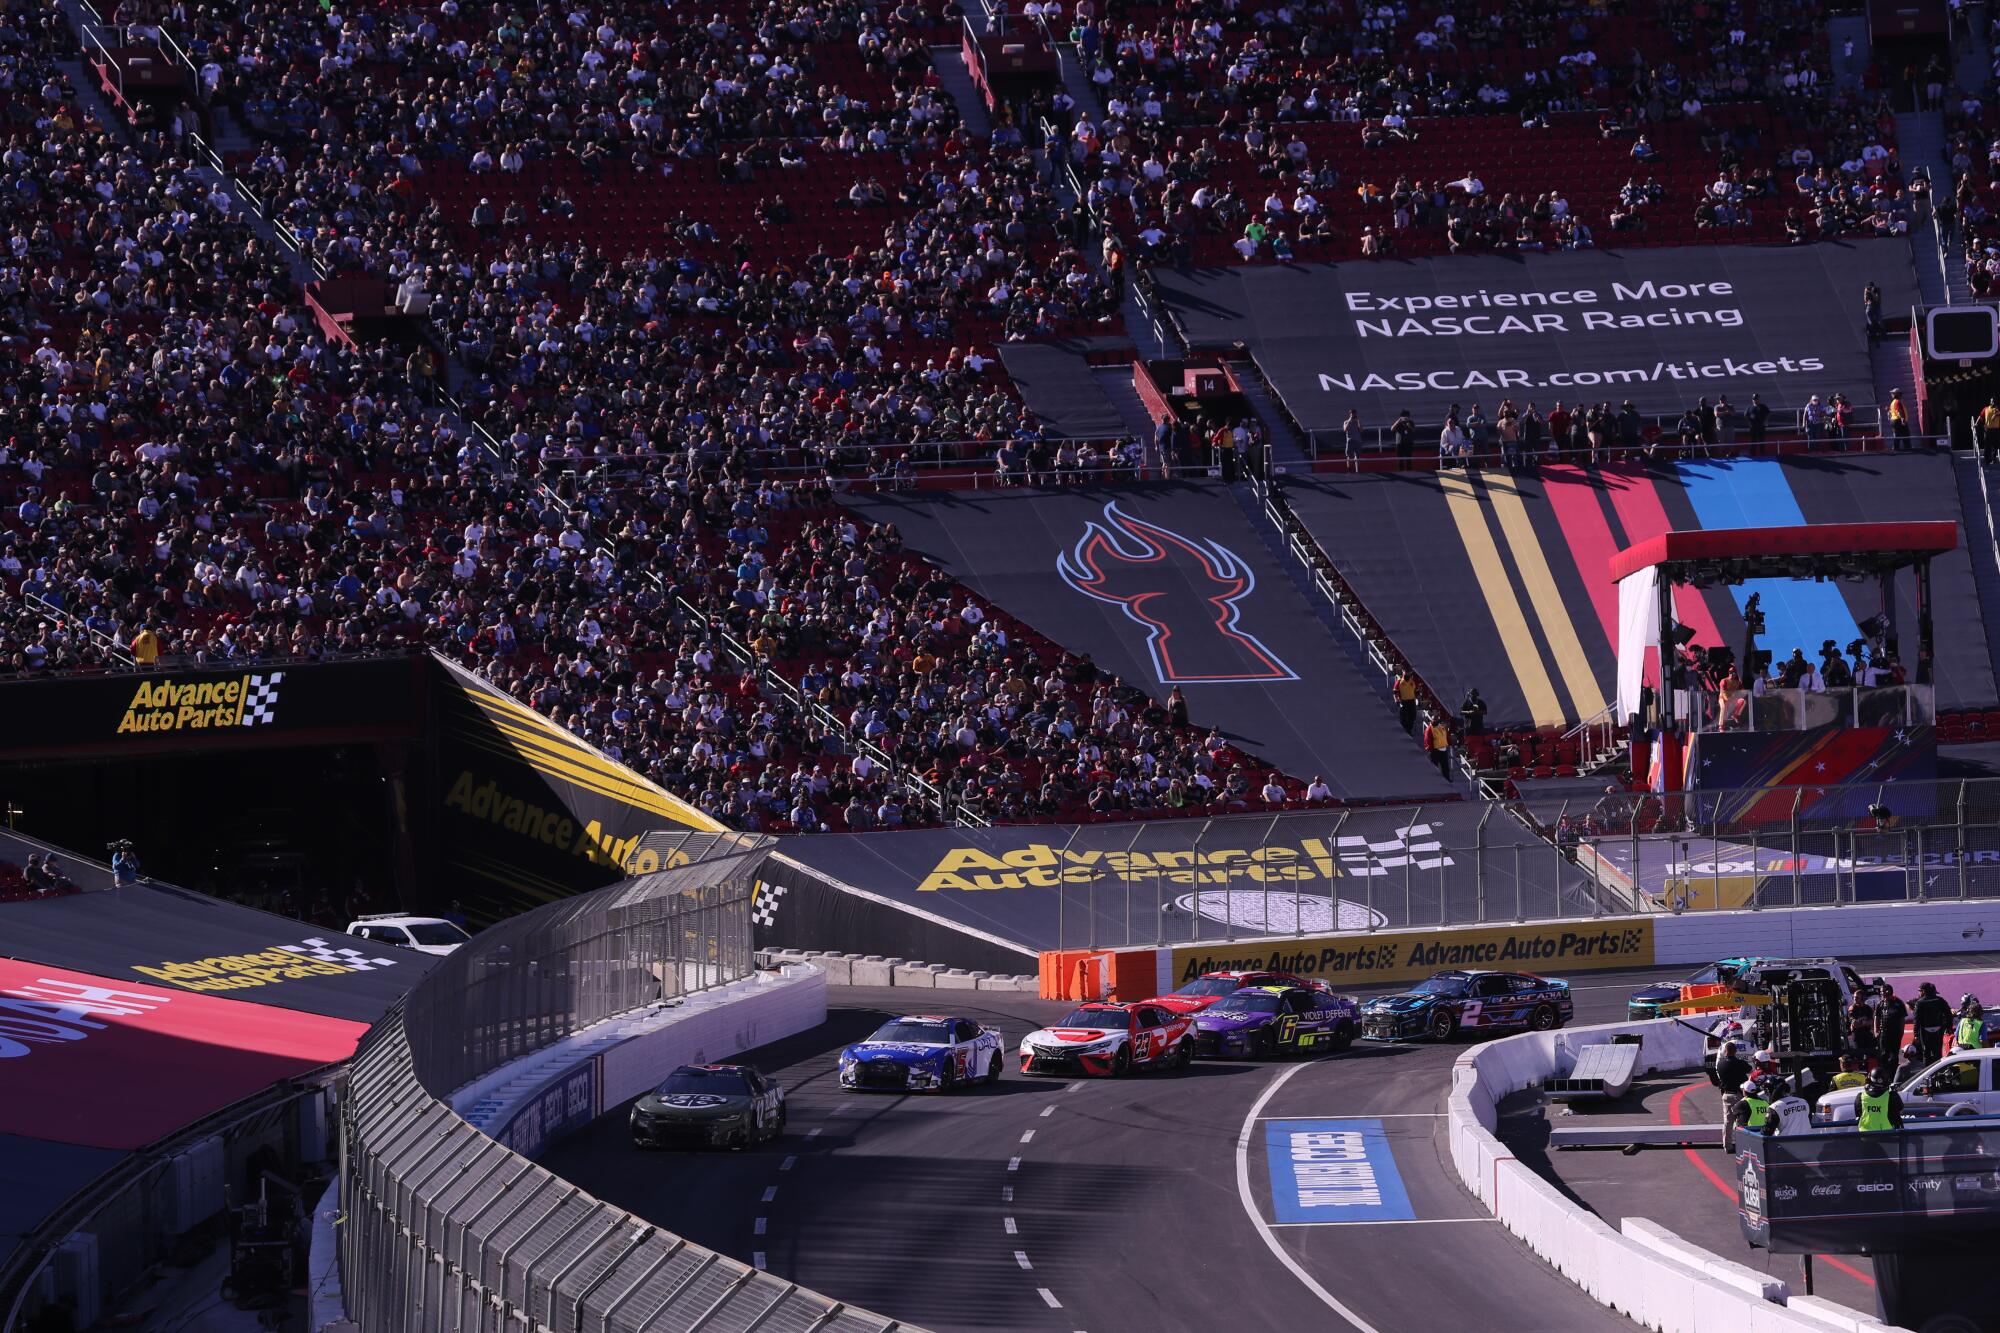 NASCAR's season-opening Clash exhibition race made a historic first visit to the  Los Angeles Memorial Coliseum in 2022. 